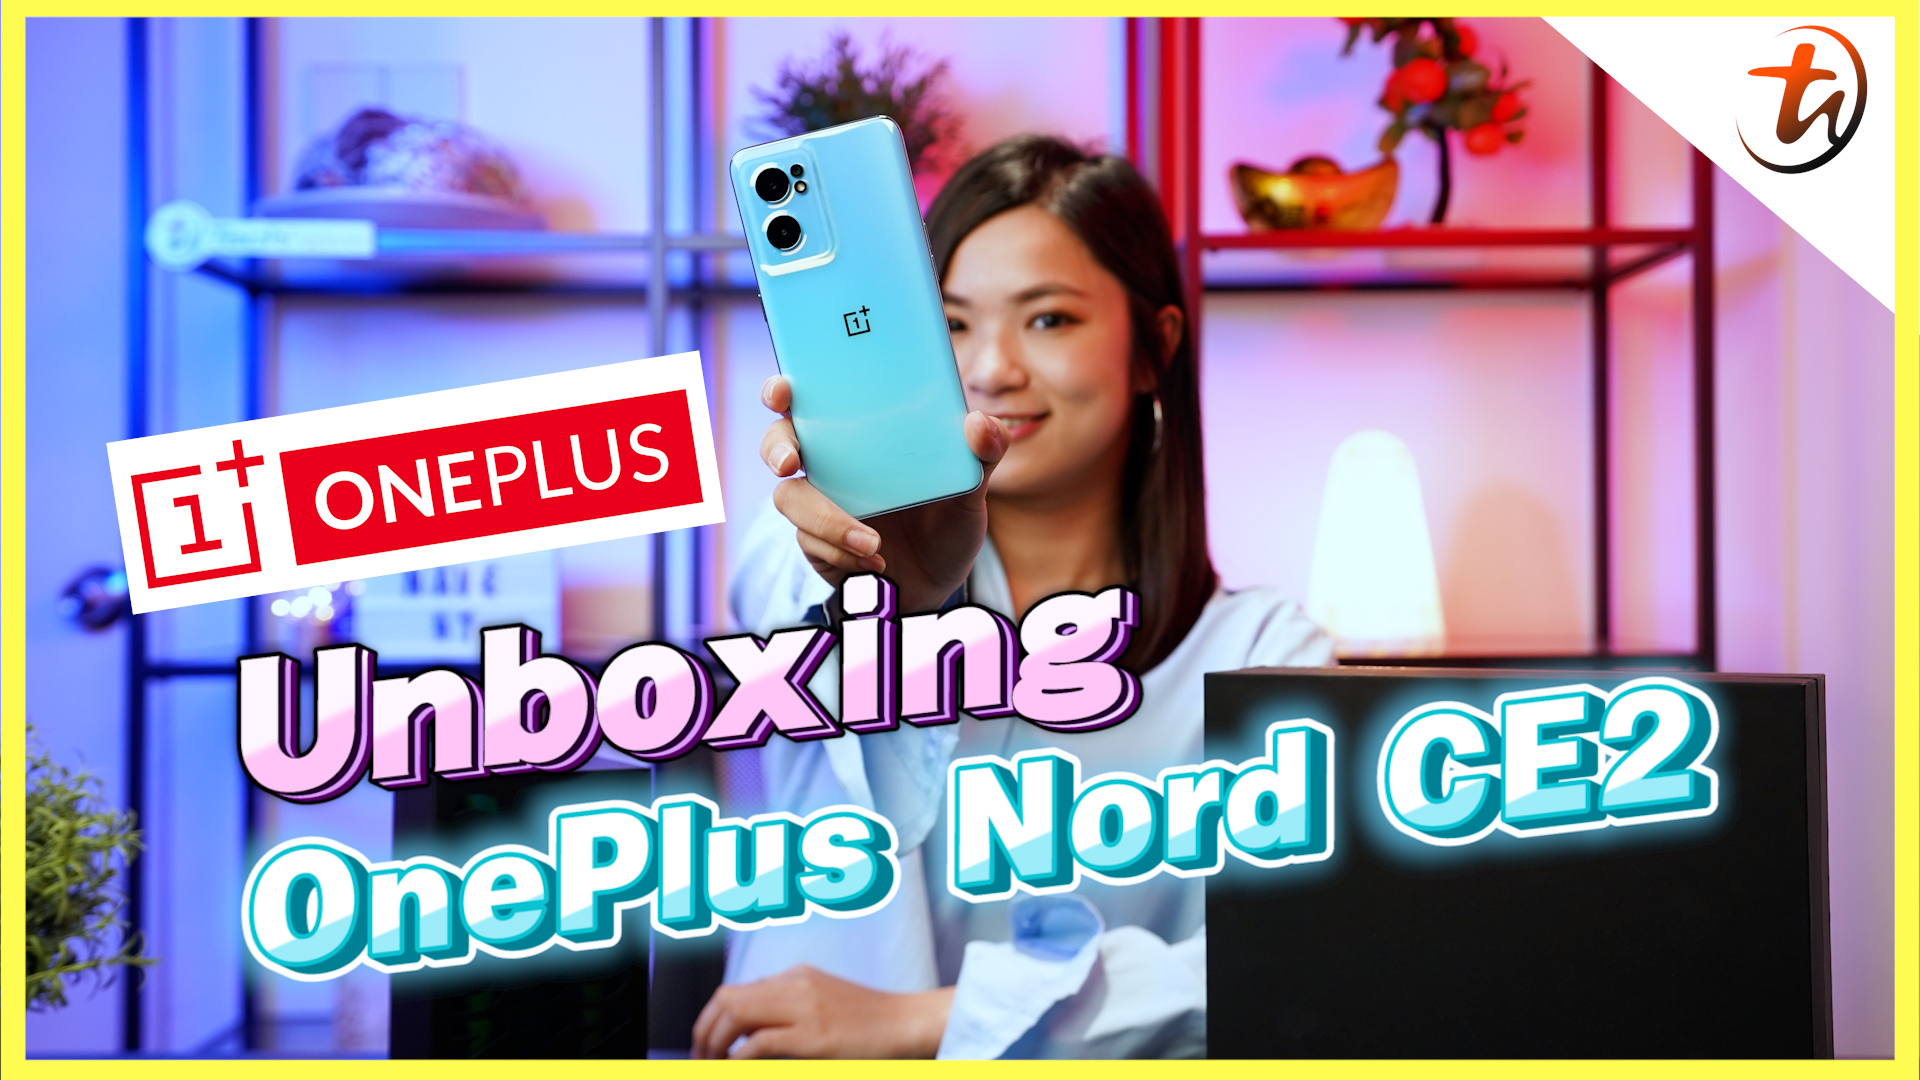 OnePlus Nord CE 2 5G - Mid-range Killer? | TechNave Unboxing and Hands-On Video